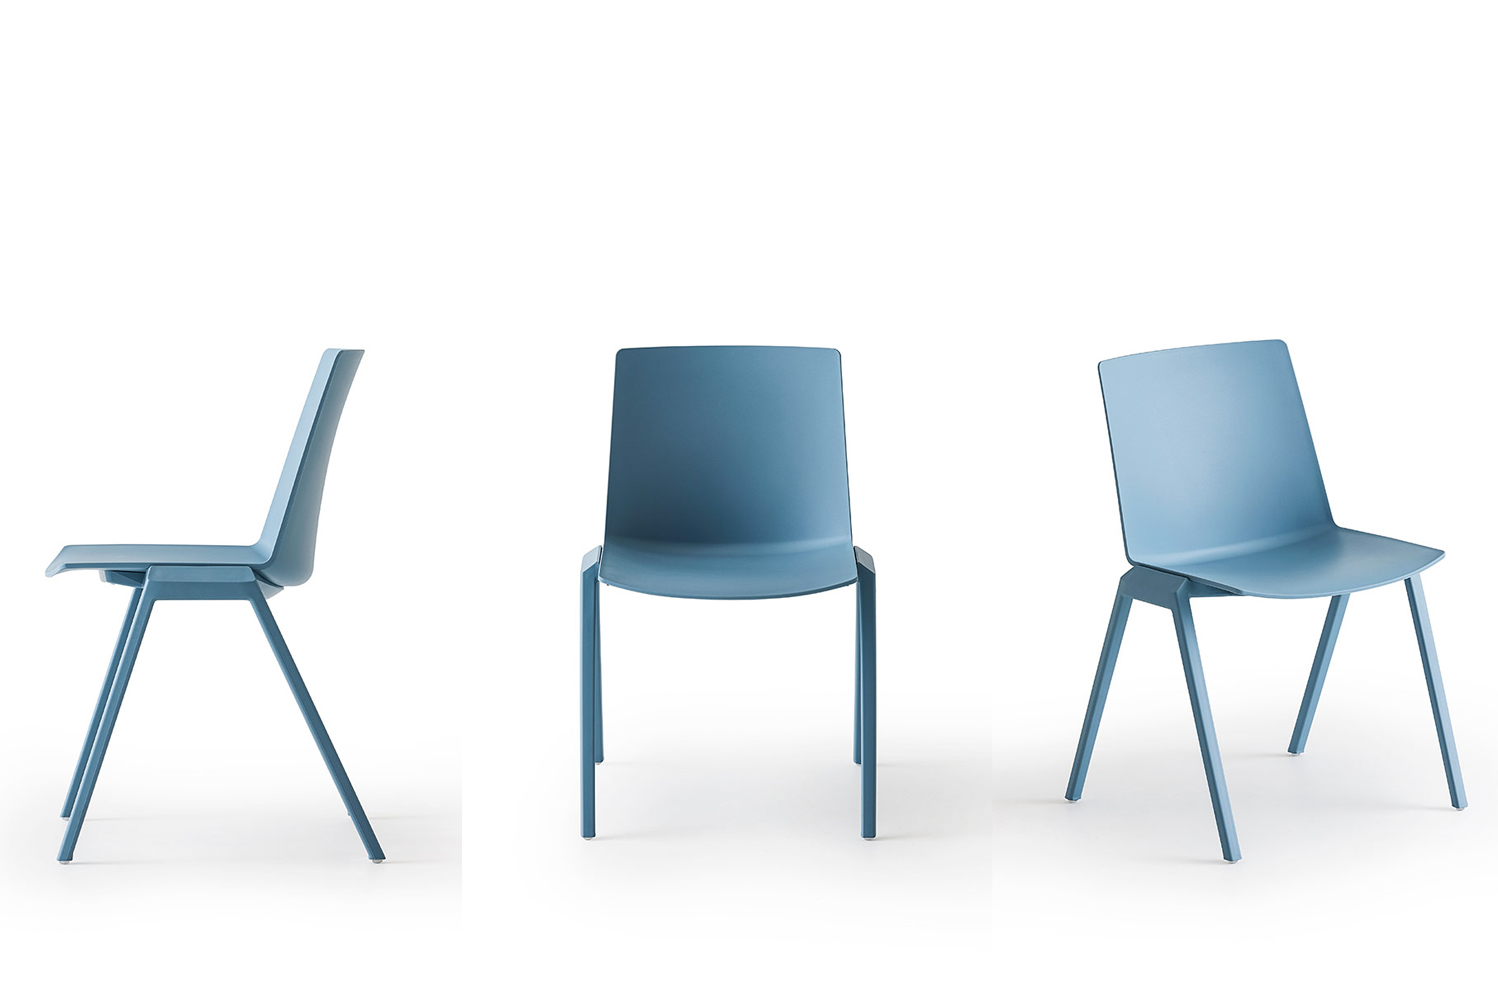 Magnuson Group launched a new indooroutdoor chair Joule marked by clean design and a soft rounded backrest 